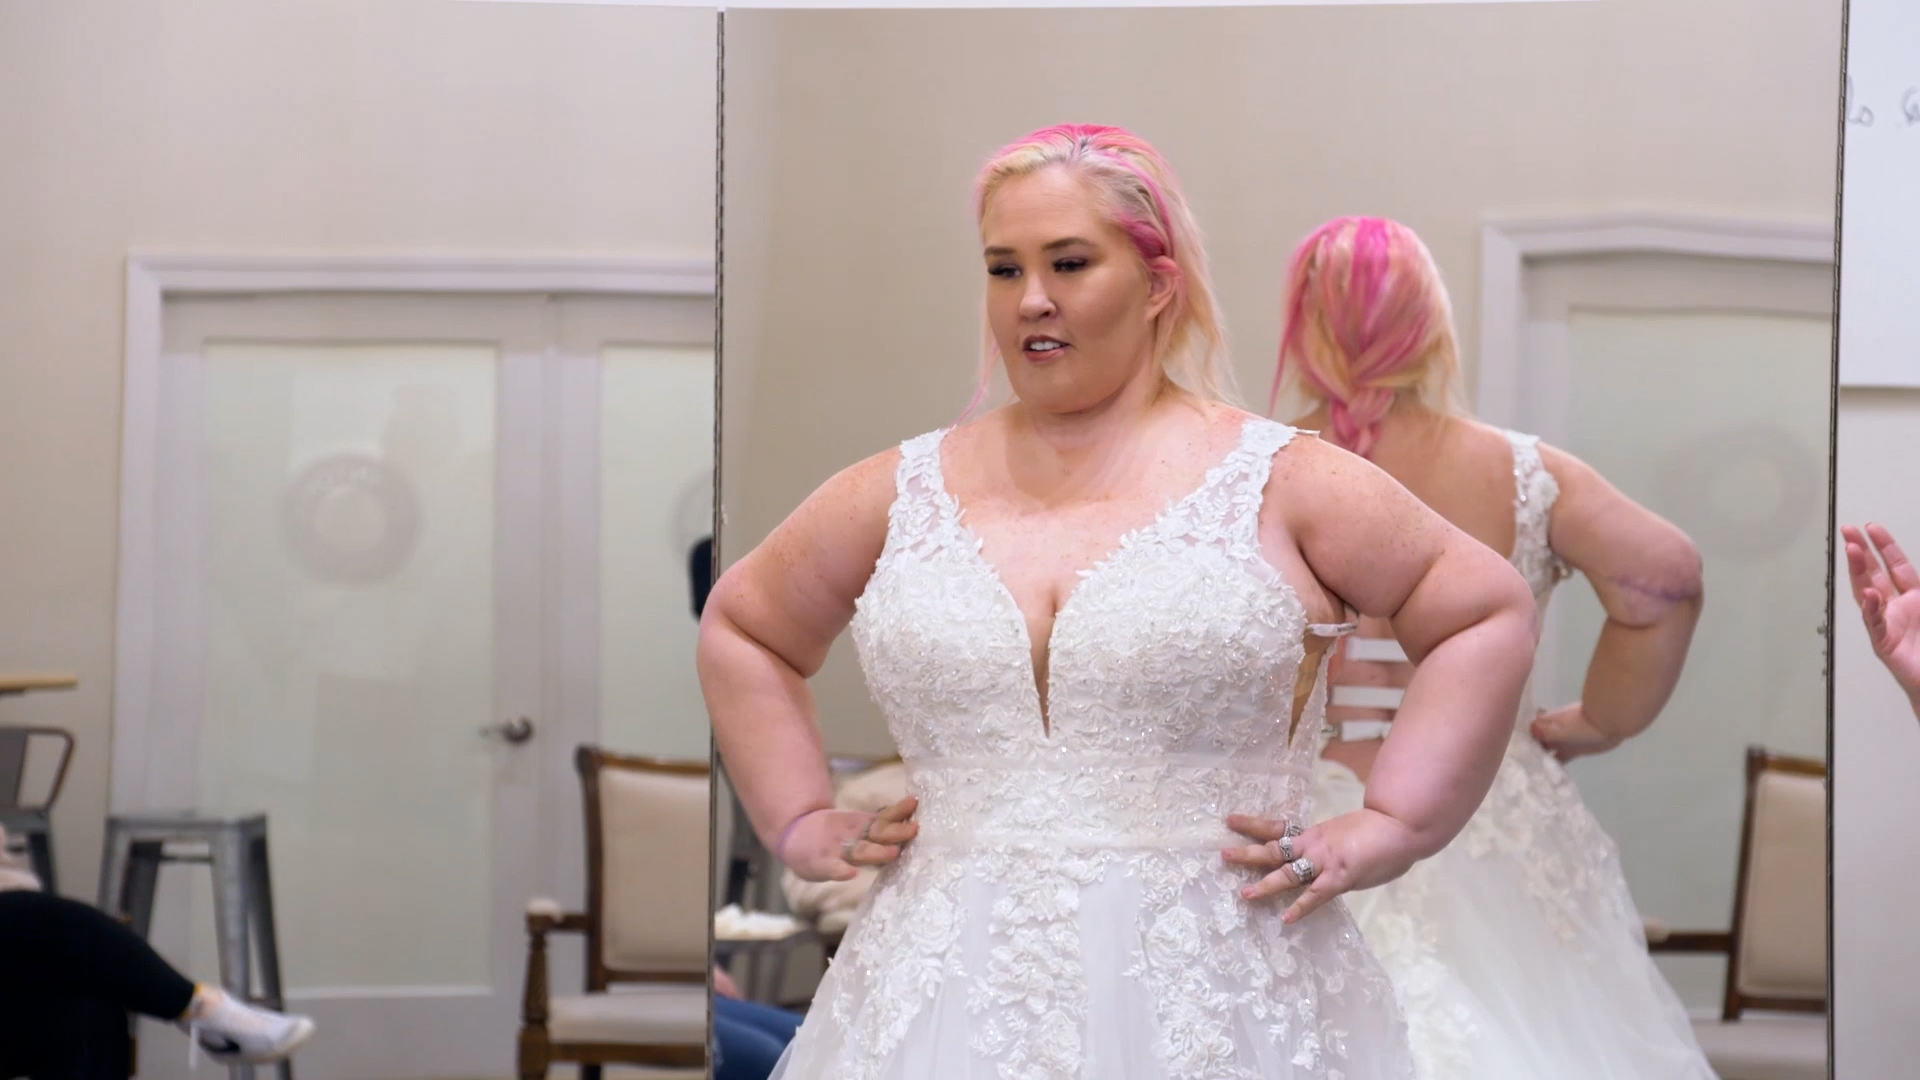 Watch "You Can't Talk to Me, I'm a Bridesmaid!" | Mama June: From Not to Hot Video Extras